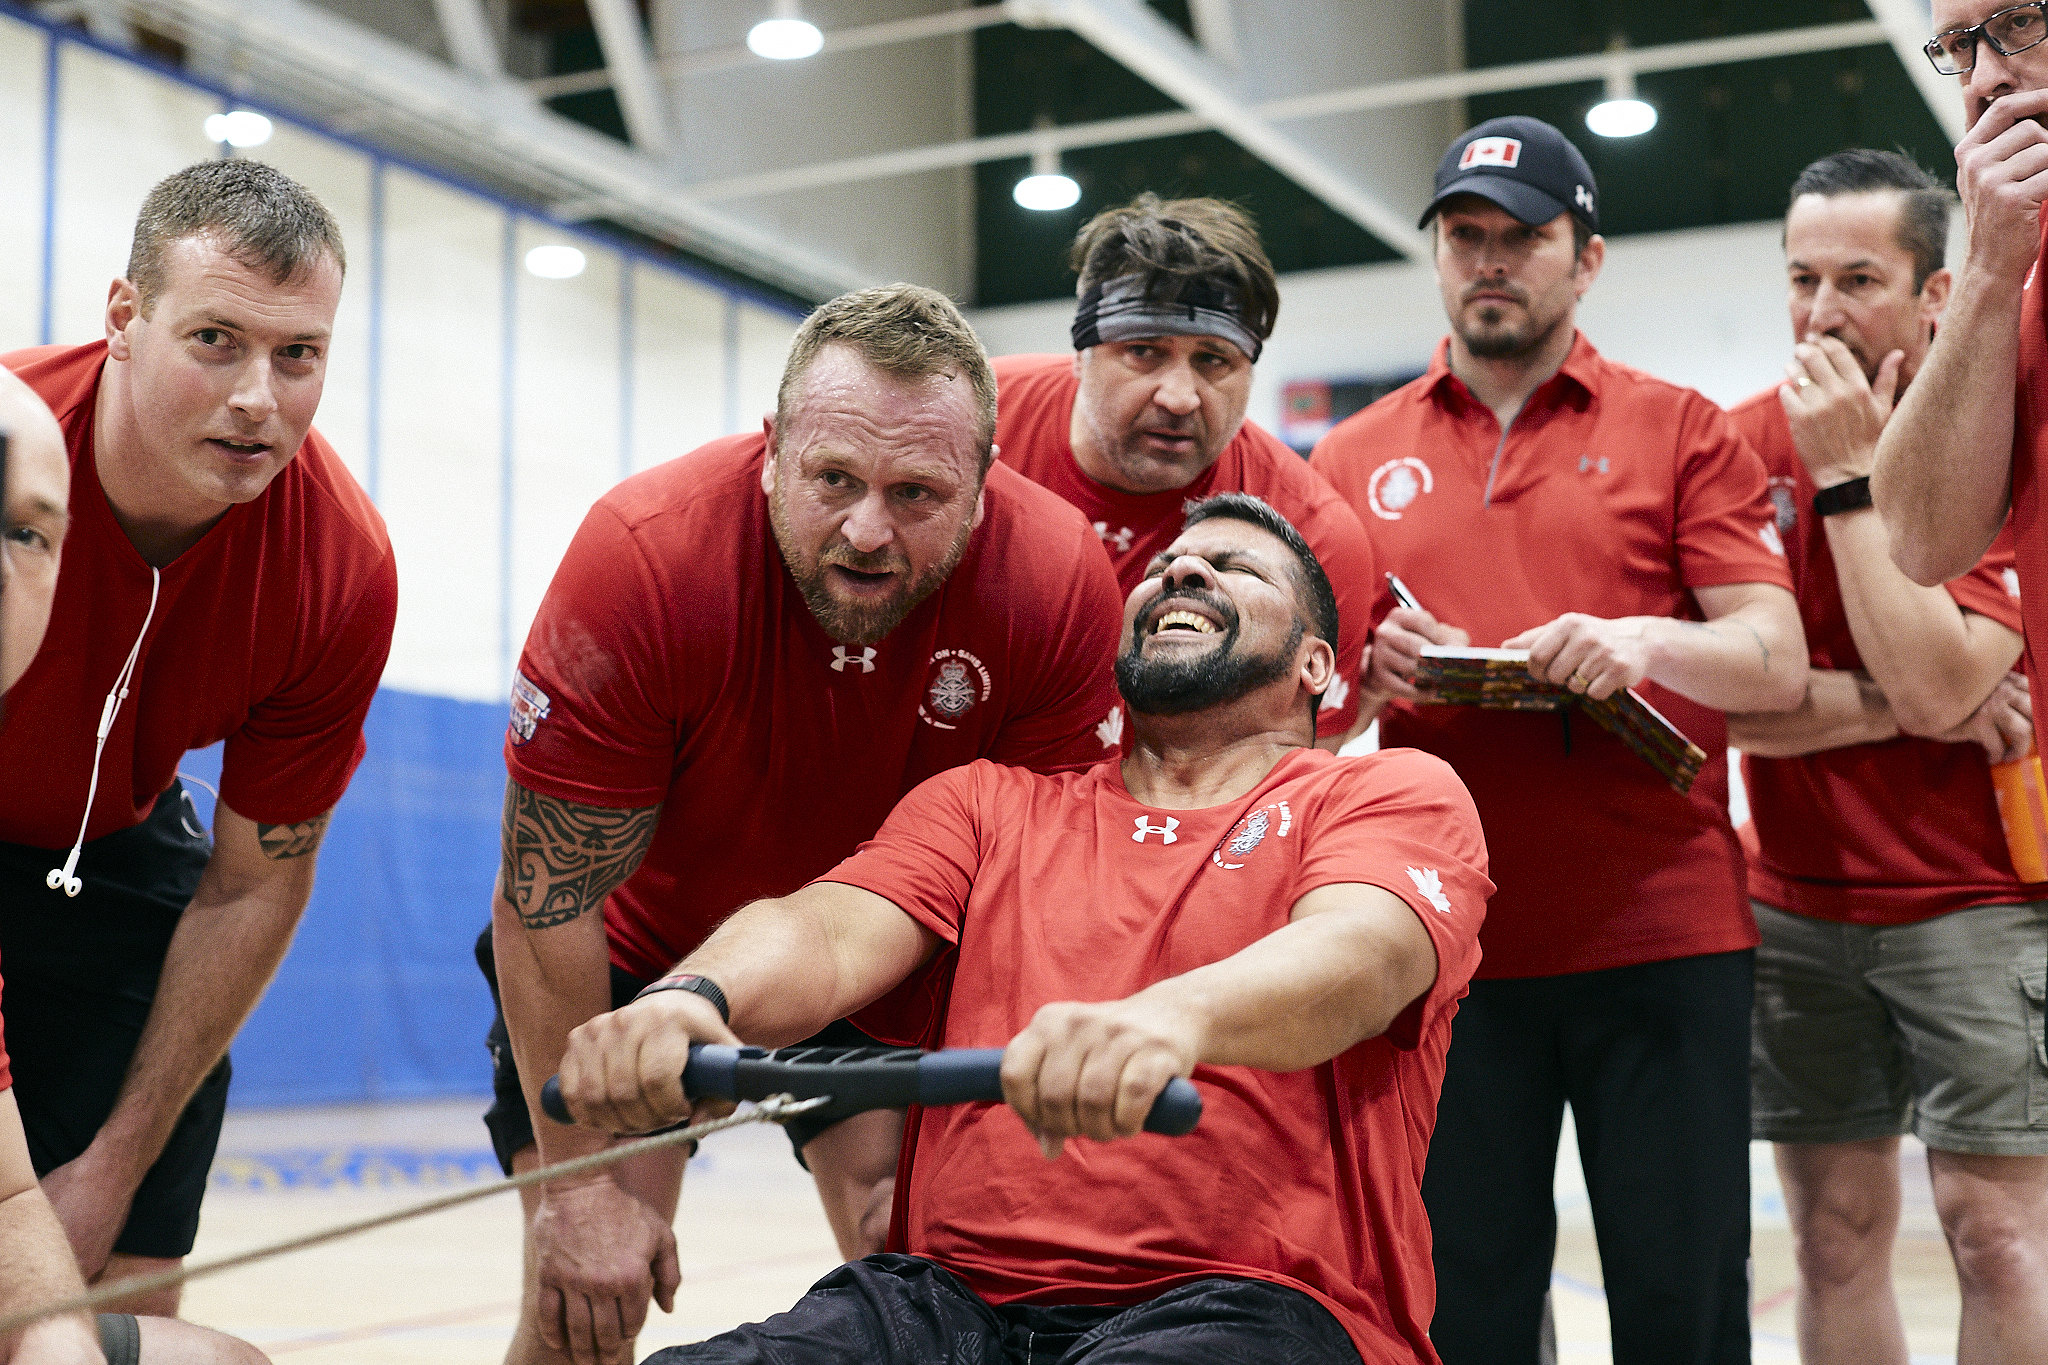 Participate in the 2021 Canadian Indoor Rowing Championships Soldier